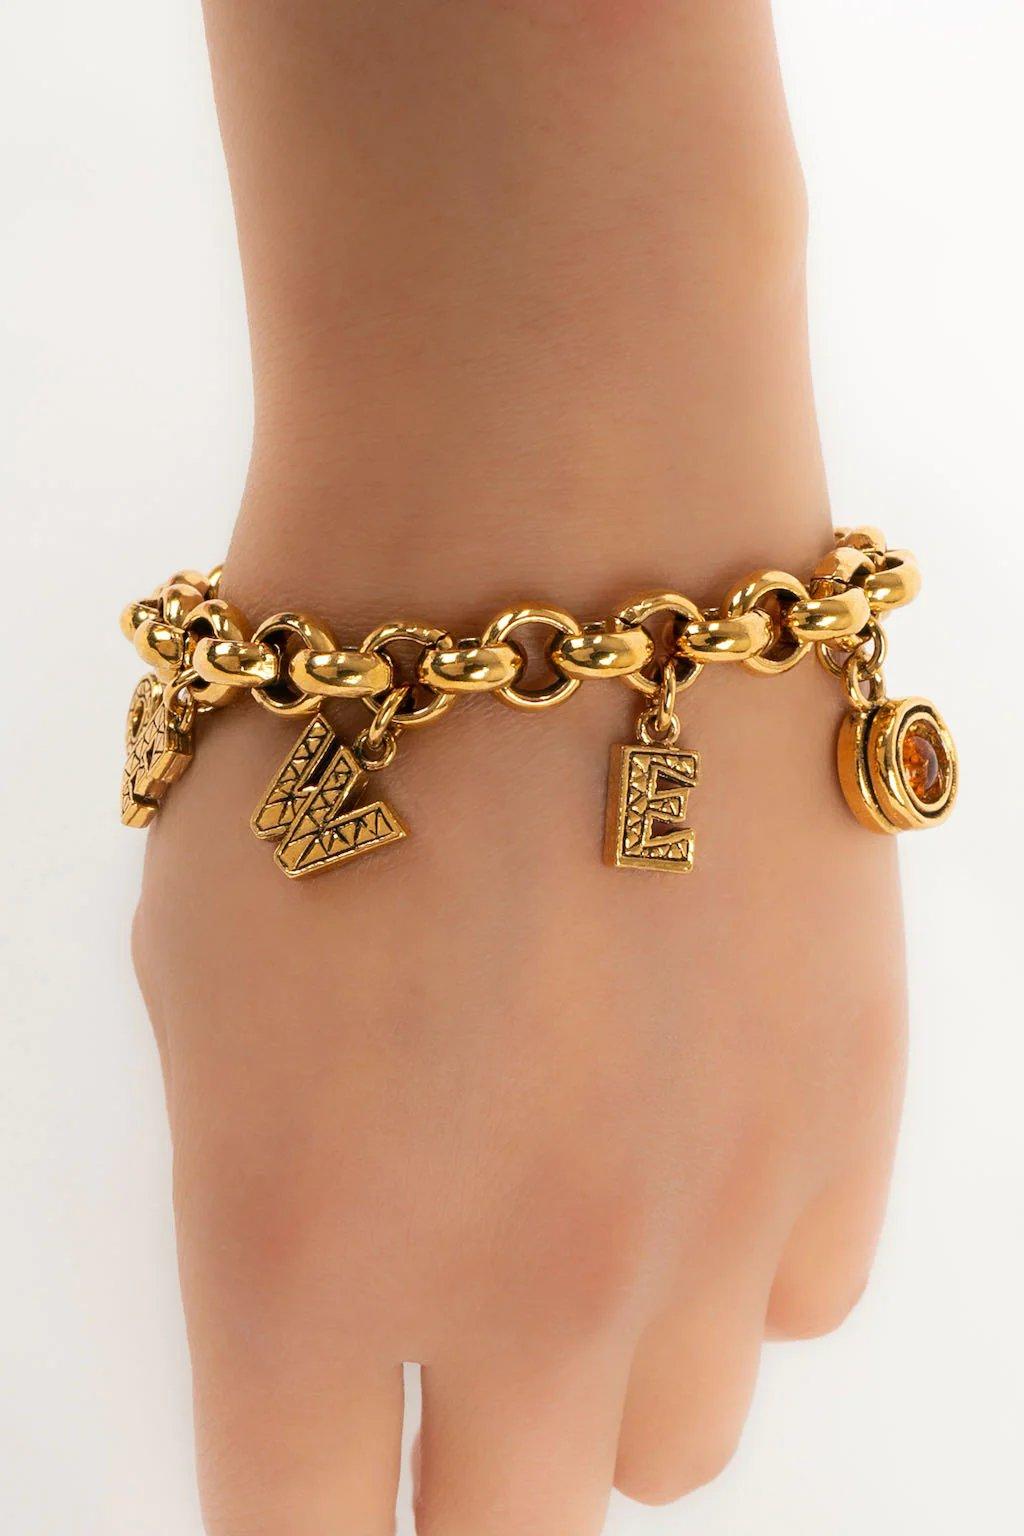 Loewe Golden Metal Bracelet with Charms In Excellent Condition For Sale In SAINT-OUEN-SUR-SEINE, FR